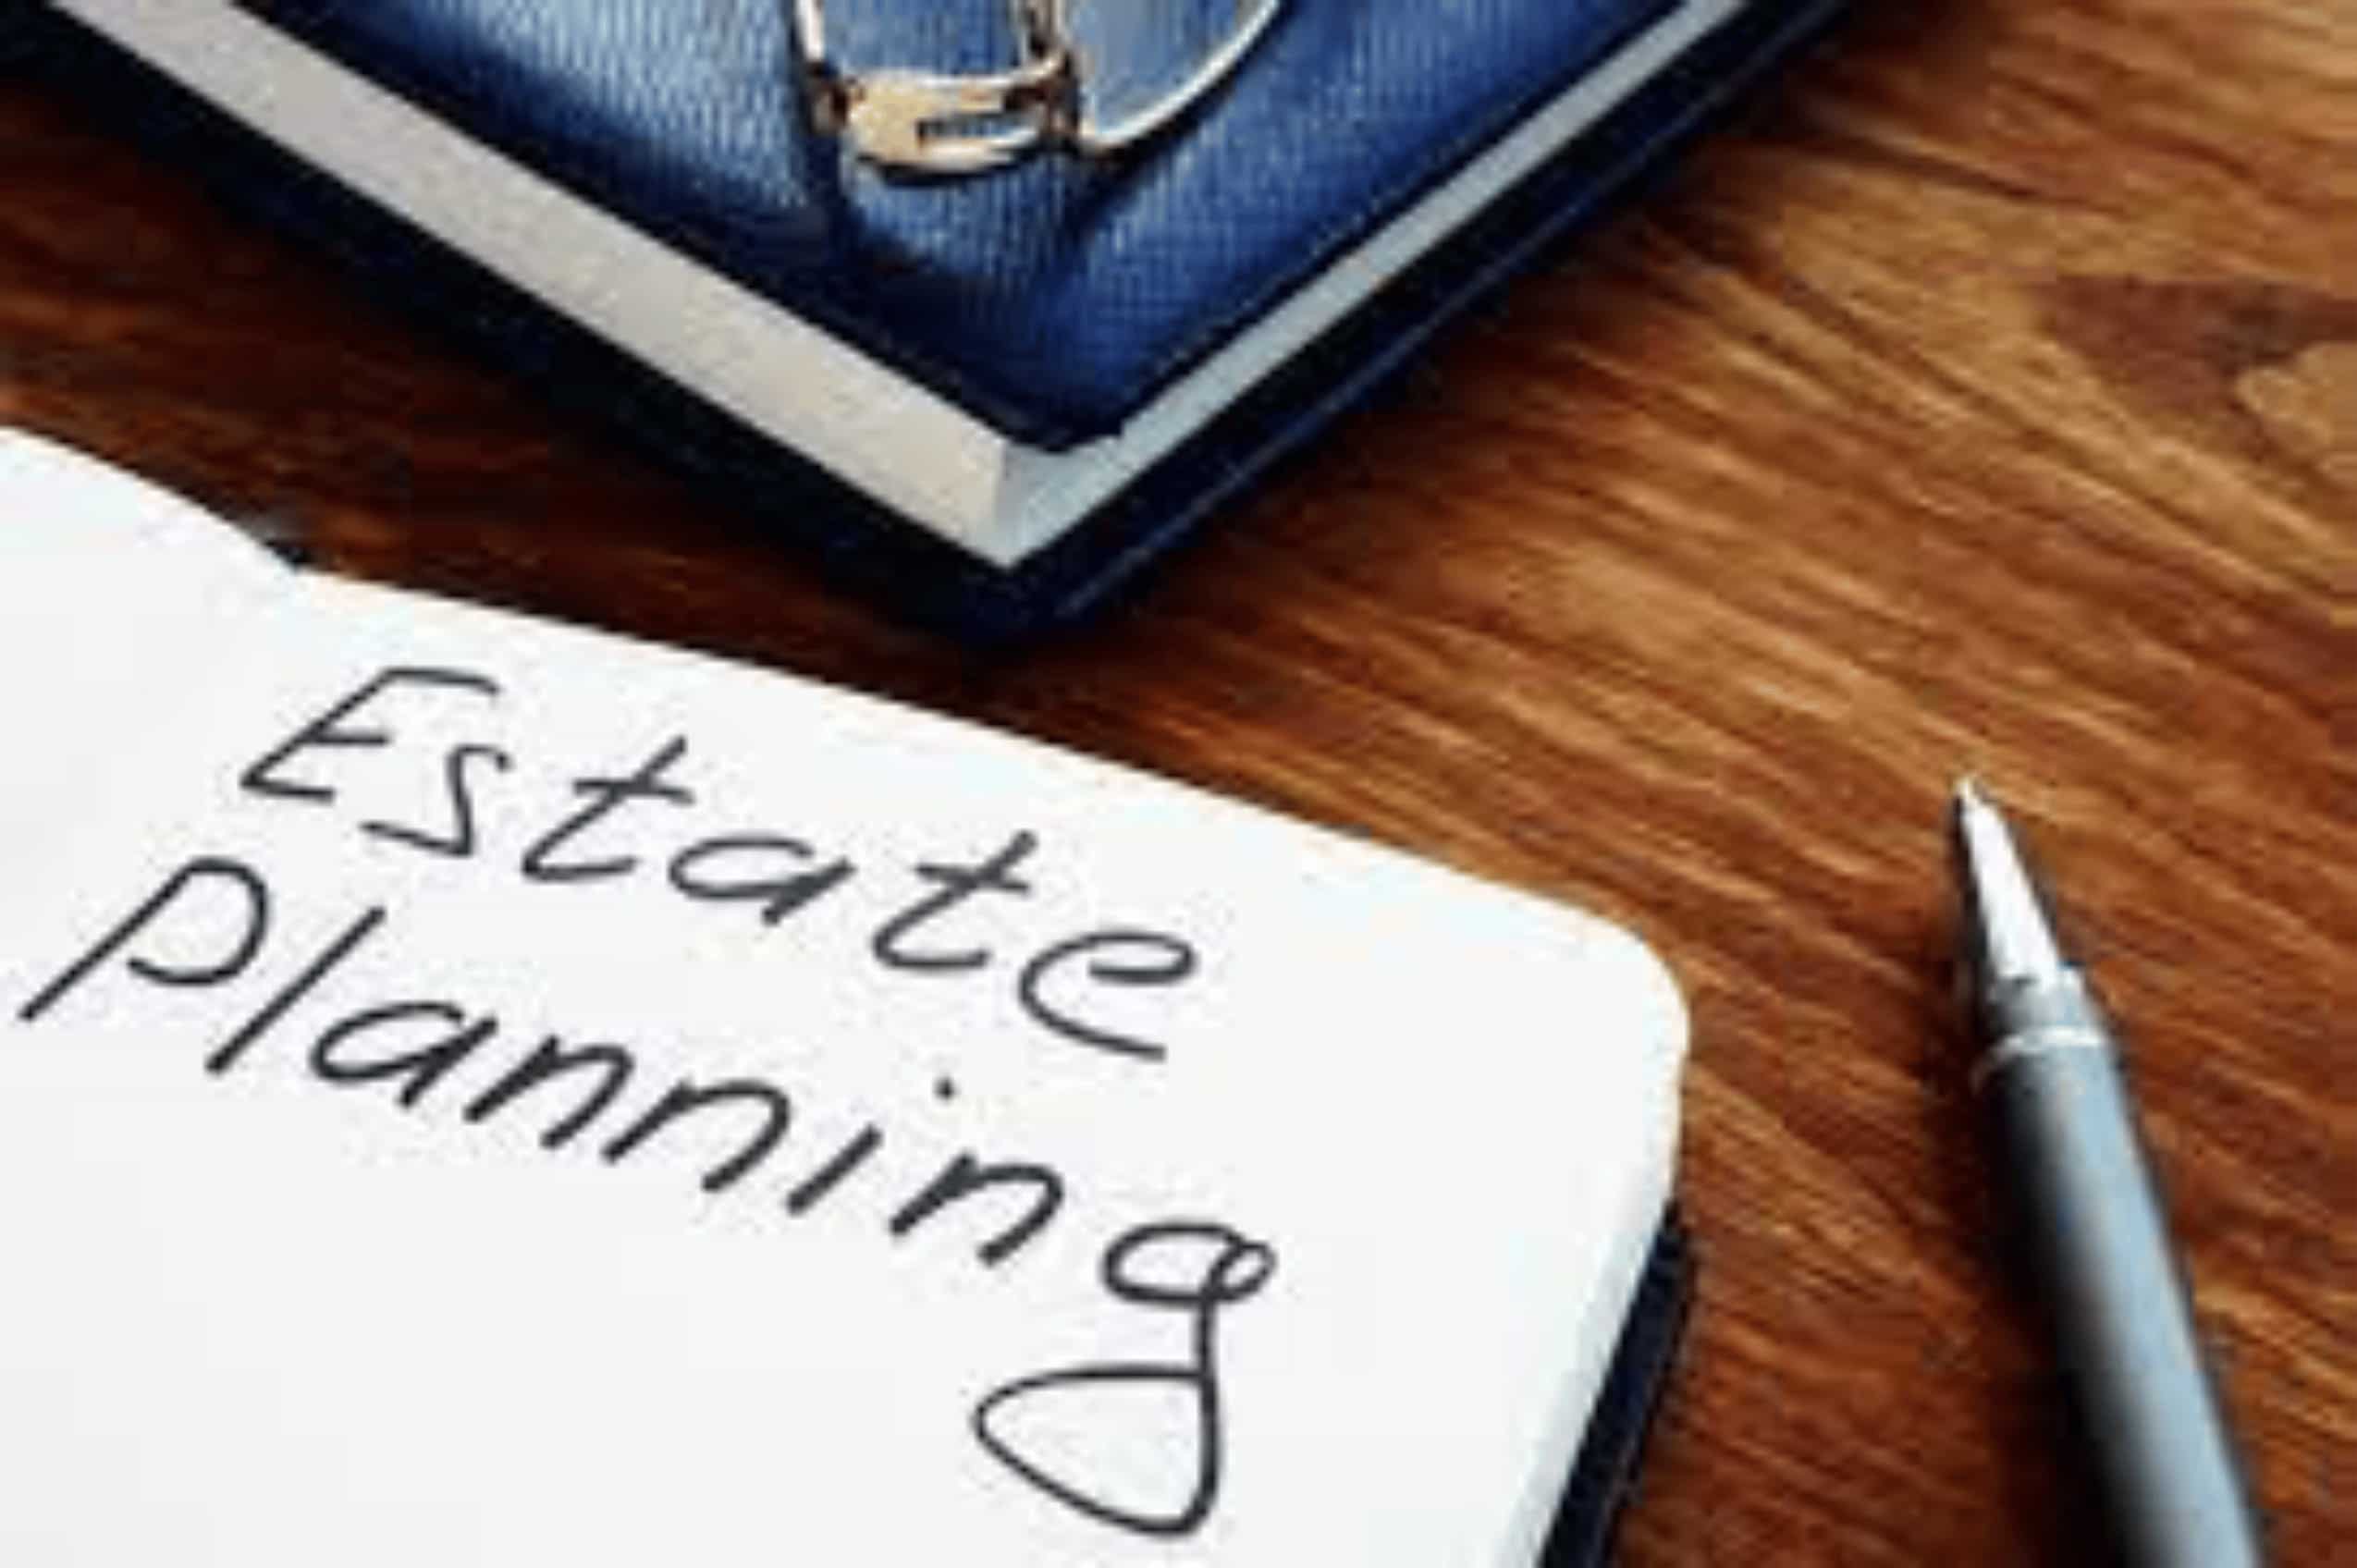 What are some of the disadvantages of using trusts for estate planning